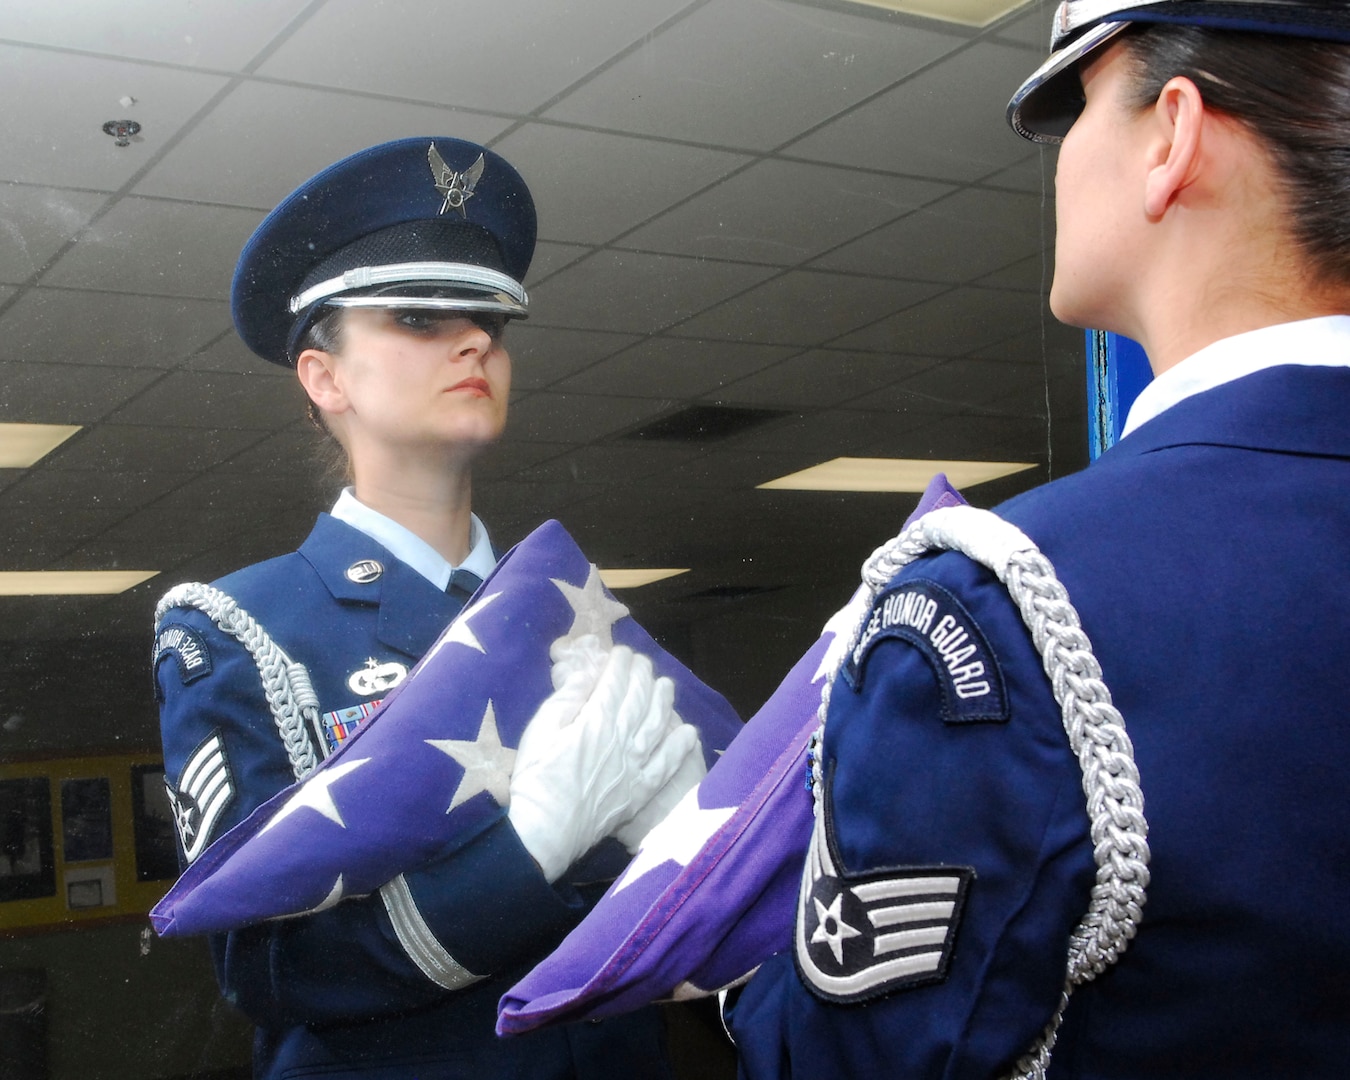 Staff Sgt. Ashley Atkinson, 59th Laboratory Squadron, looks over her form before presenting the flag to the next of kin during a Lackland Honor Guard practice session. Last year, the Lackland Honor Guard rendered honors at 1, 031 funerals of deceased Air Force and Army Air Corps veterans (U.S. Air Force photo by Alan Boedeker).